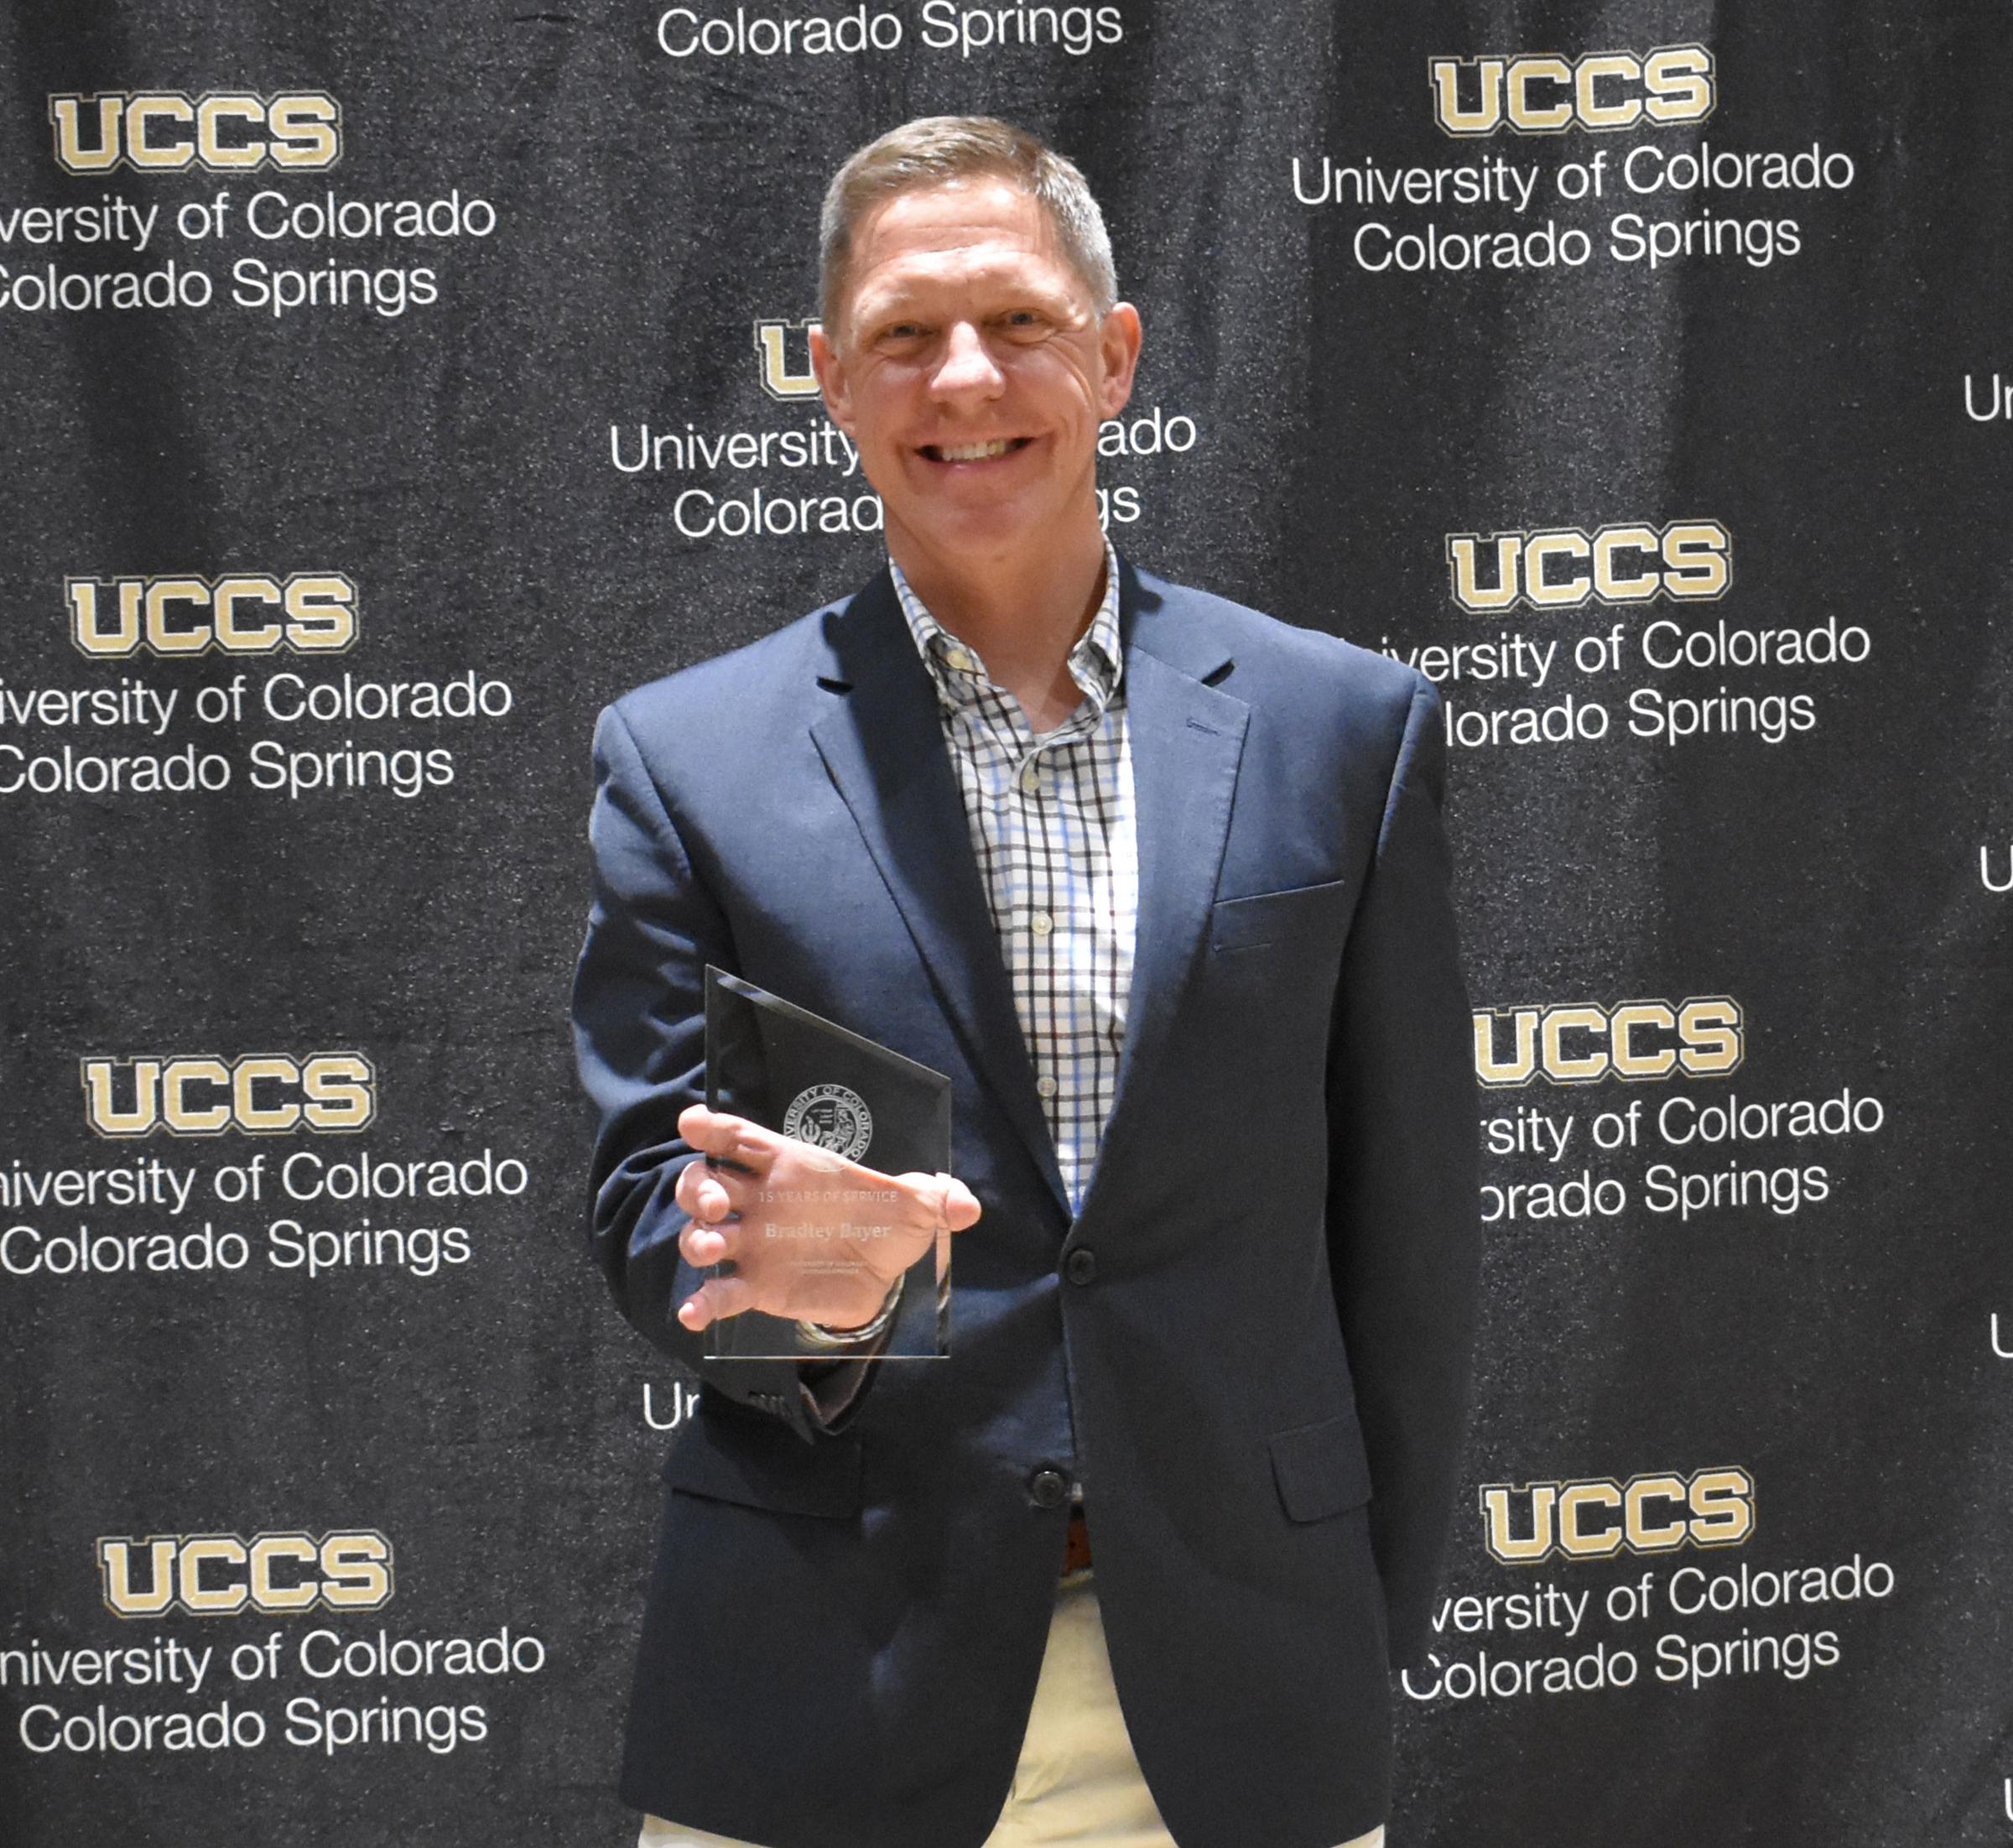 UCCS staff member holding his longevity award in front of a step and repeat that says UCCS